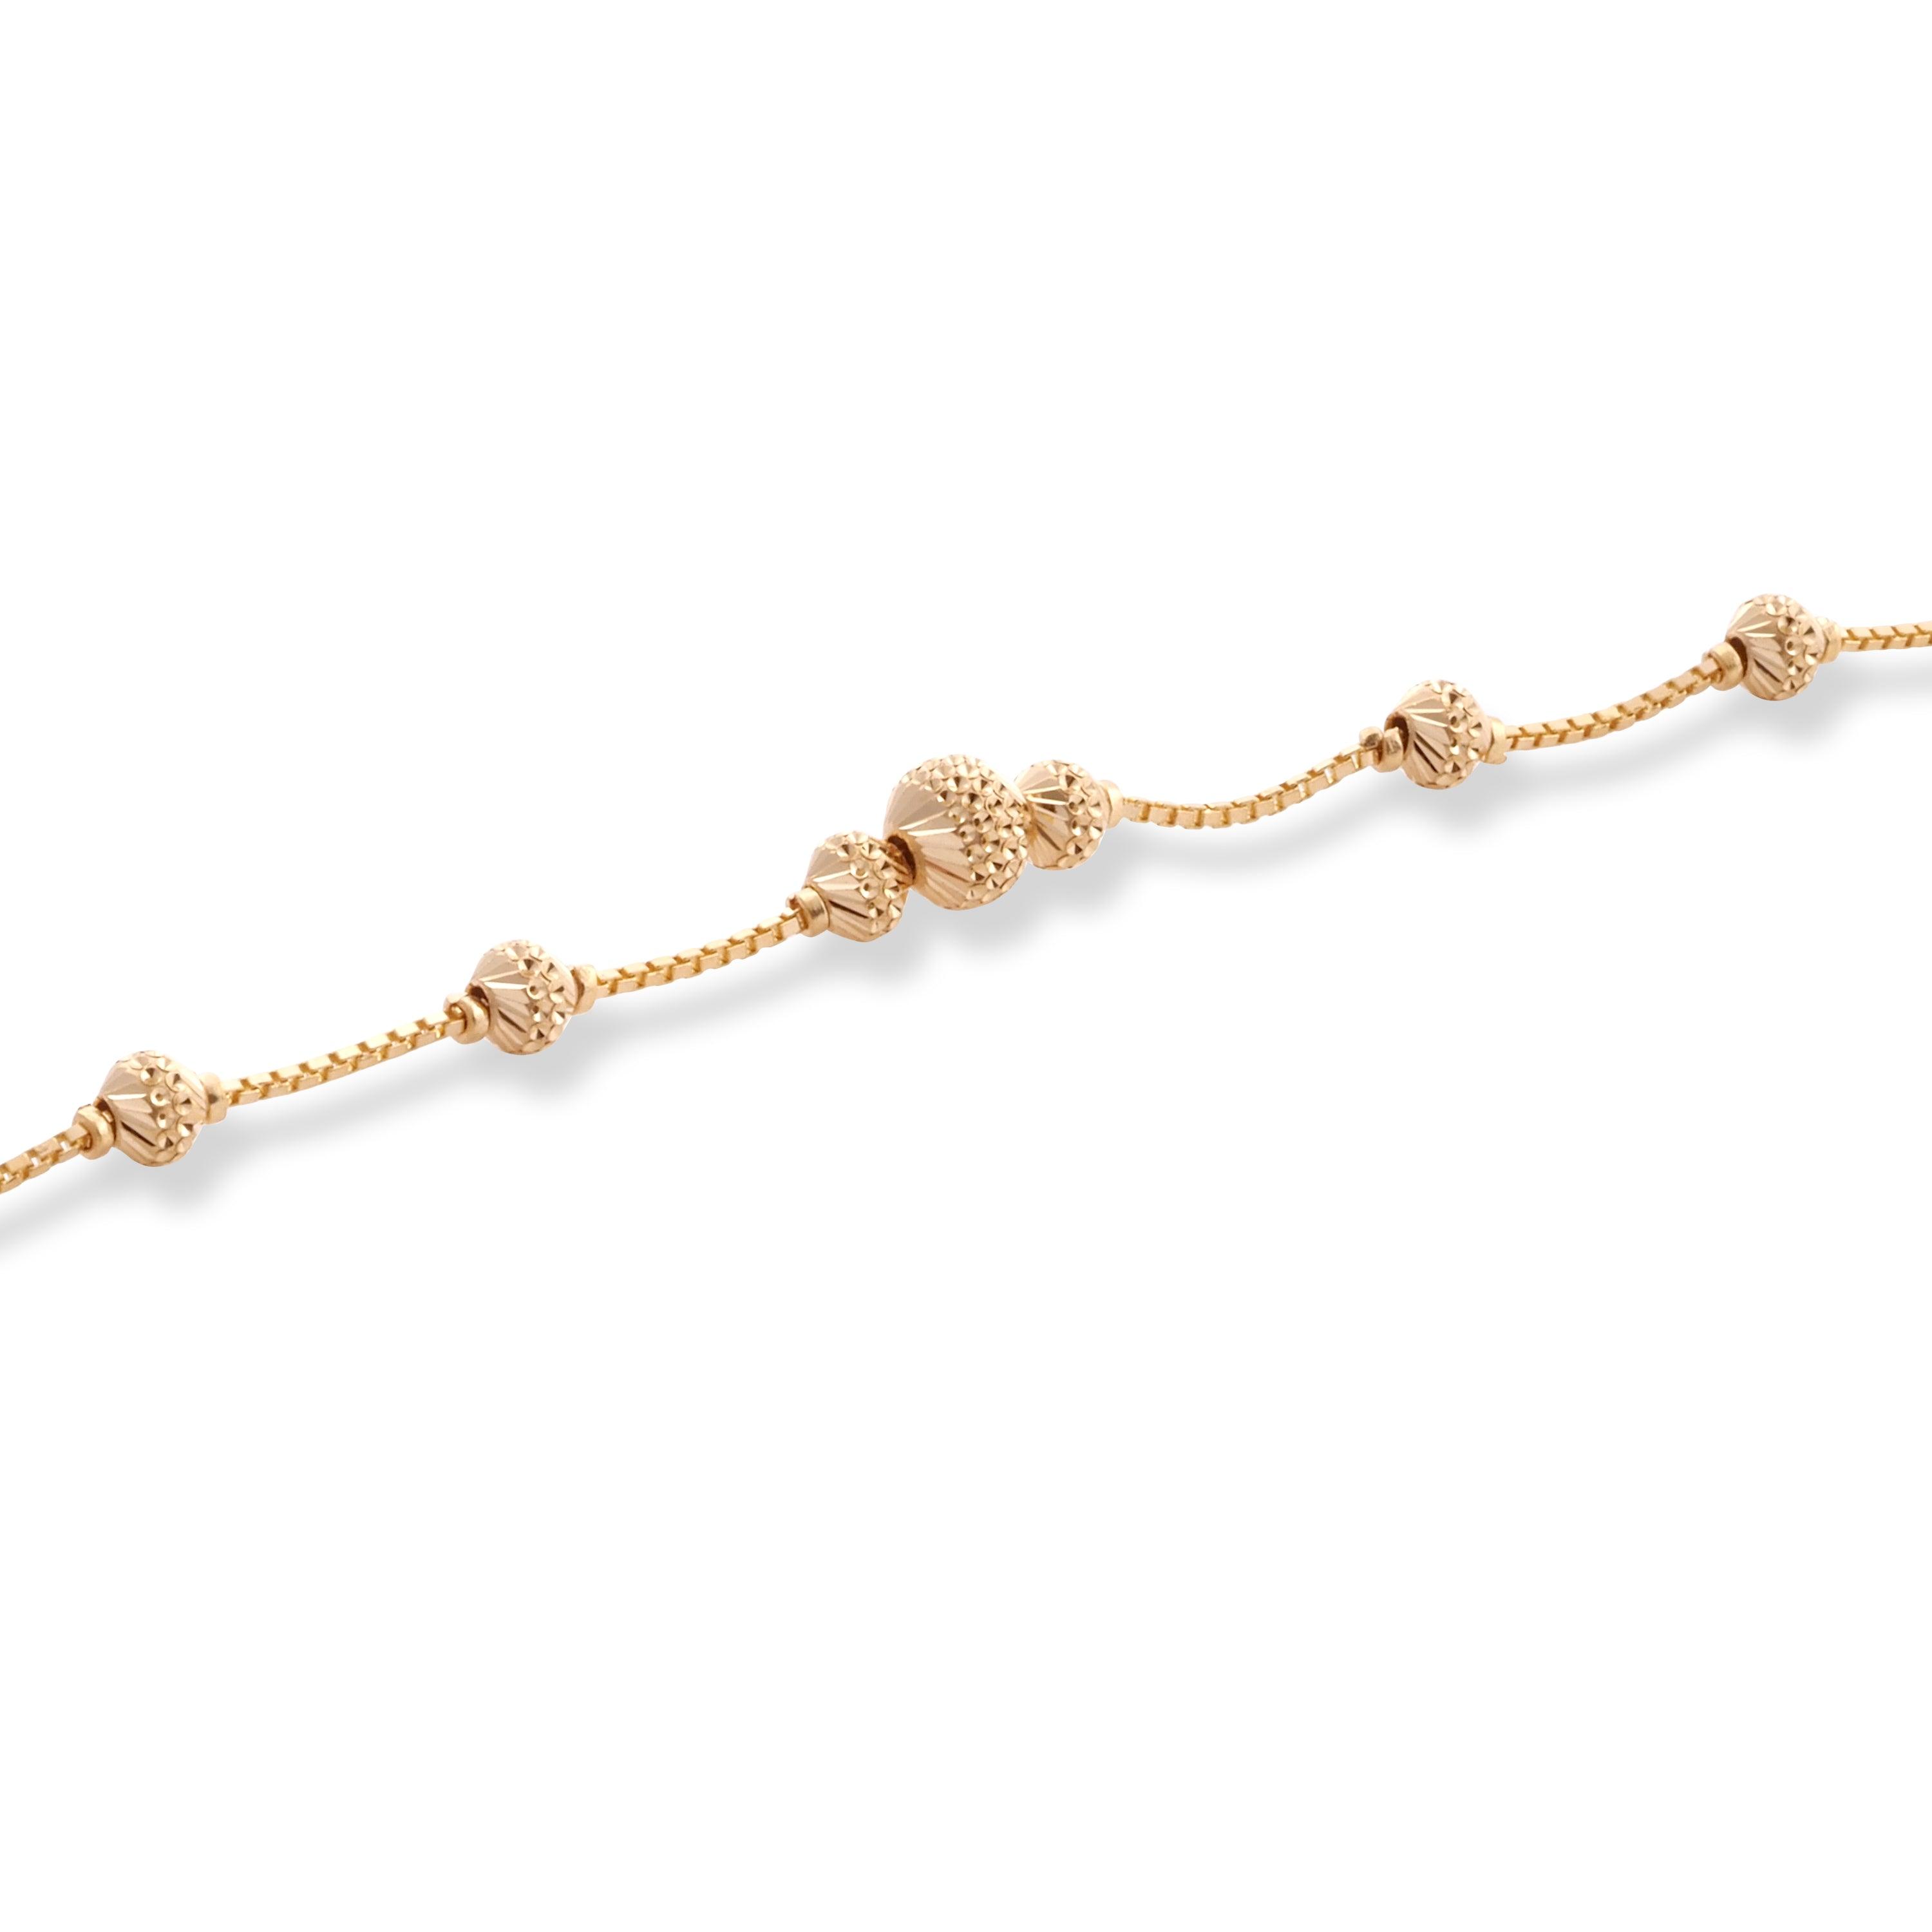 22ct Yellow Gold Bracelet in Diamond Cutting Beads Design with ''S'' Clasp LBR-8508 - Minar Jewellers